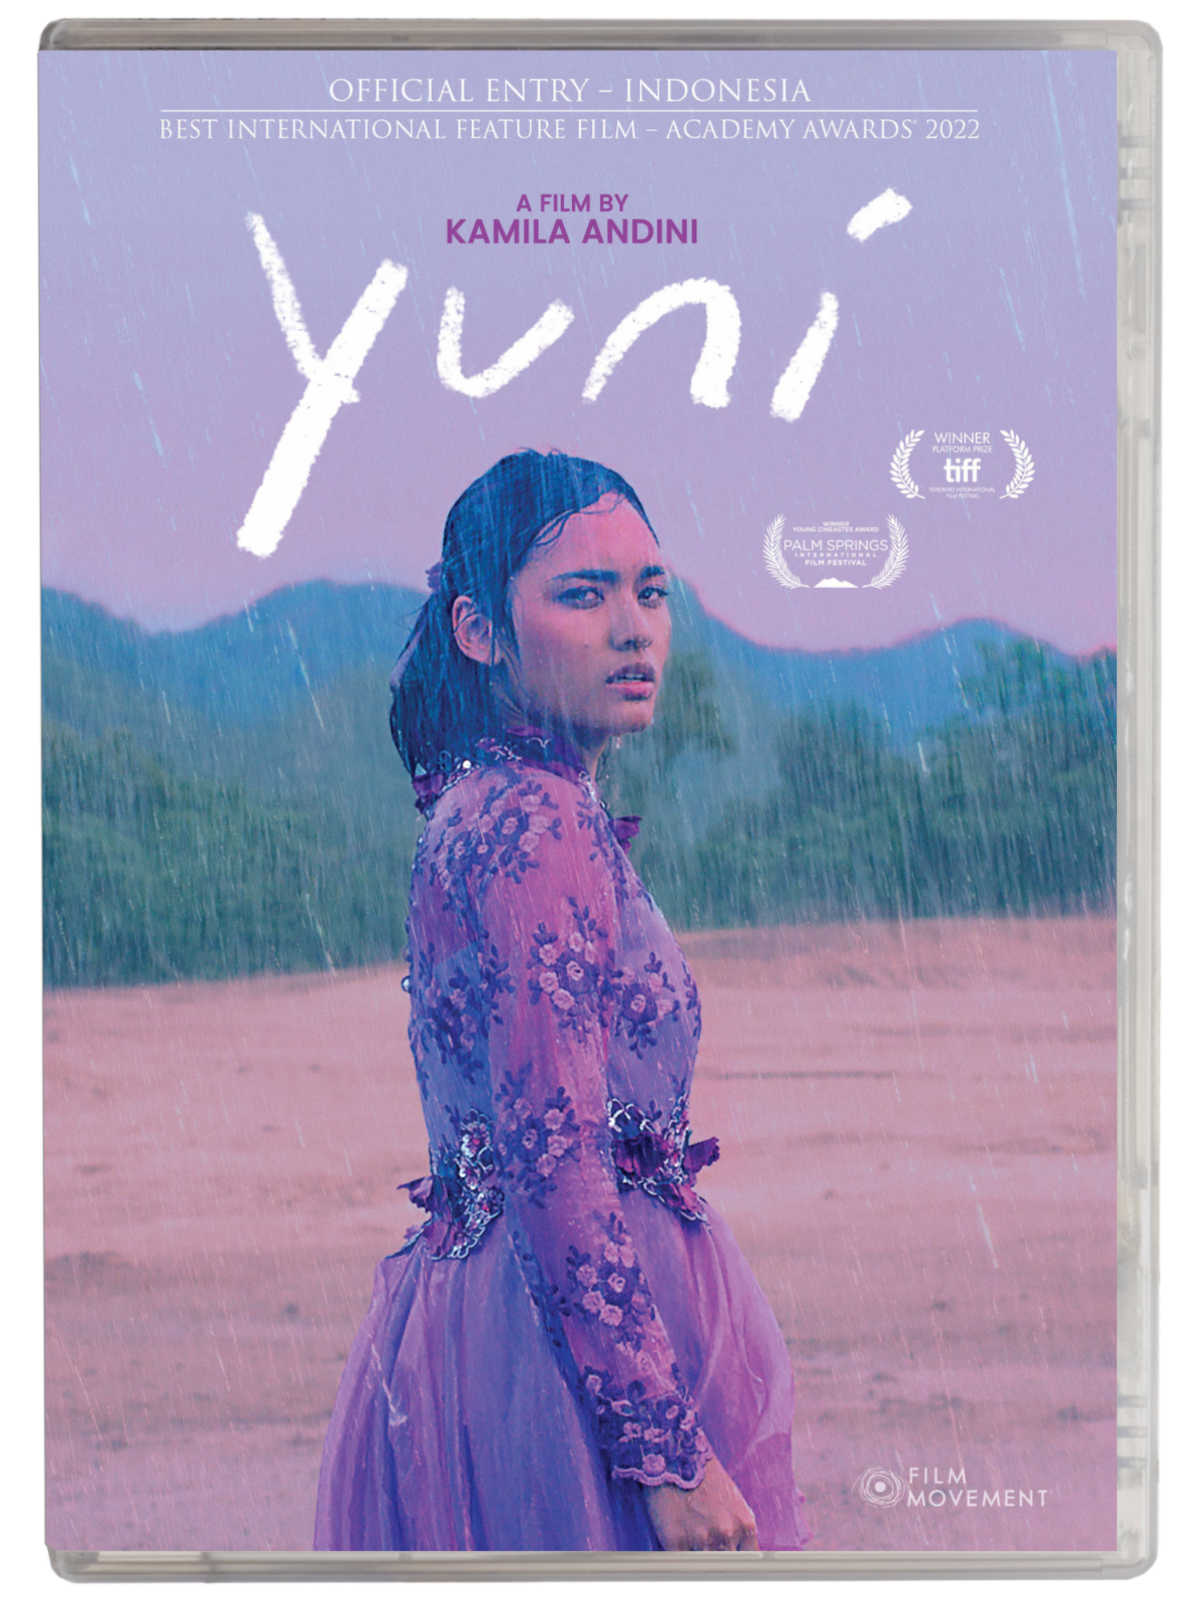 Yuni, a captivating Indonesian coming-of-age film, explores a young woman's struggle against societal pressures. Experience a rollercoaster of emotions as Yuni navigates love, education, and defining her own future. Watch with English subtitles and immerse yourself in modern Indonesian culture.